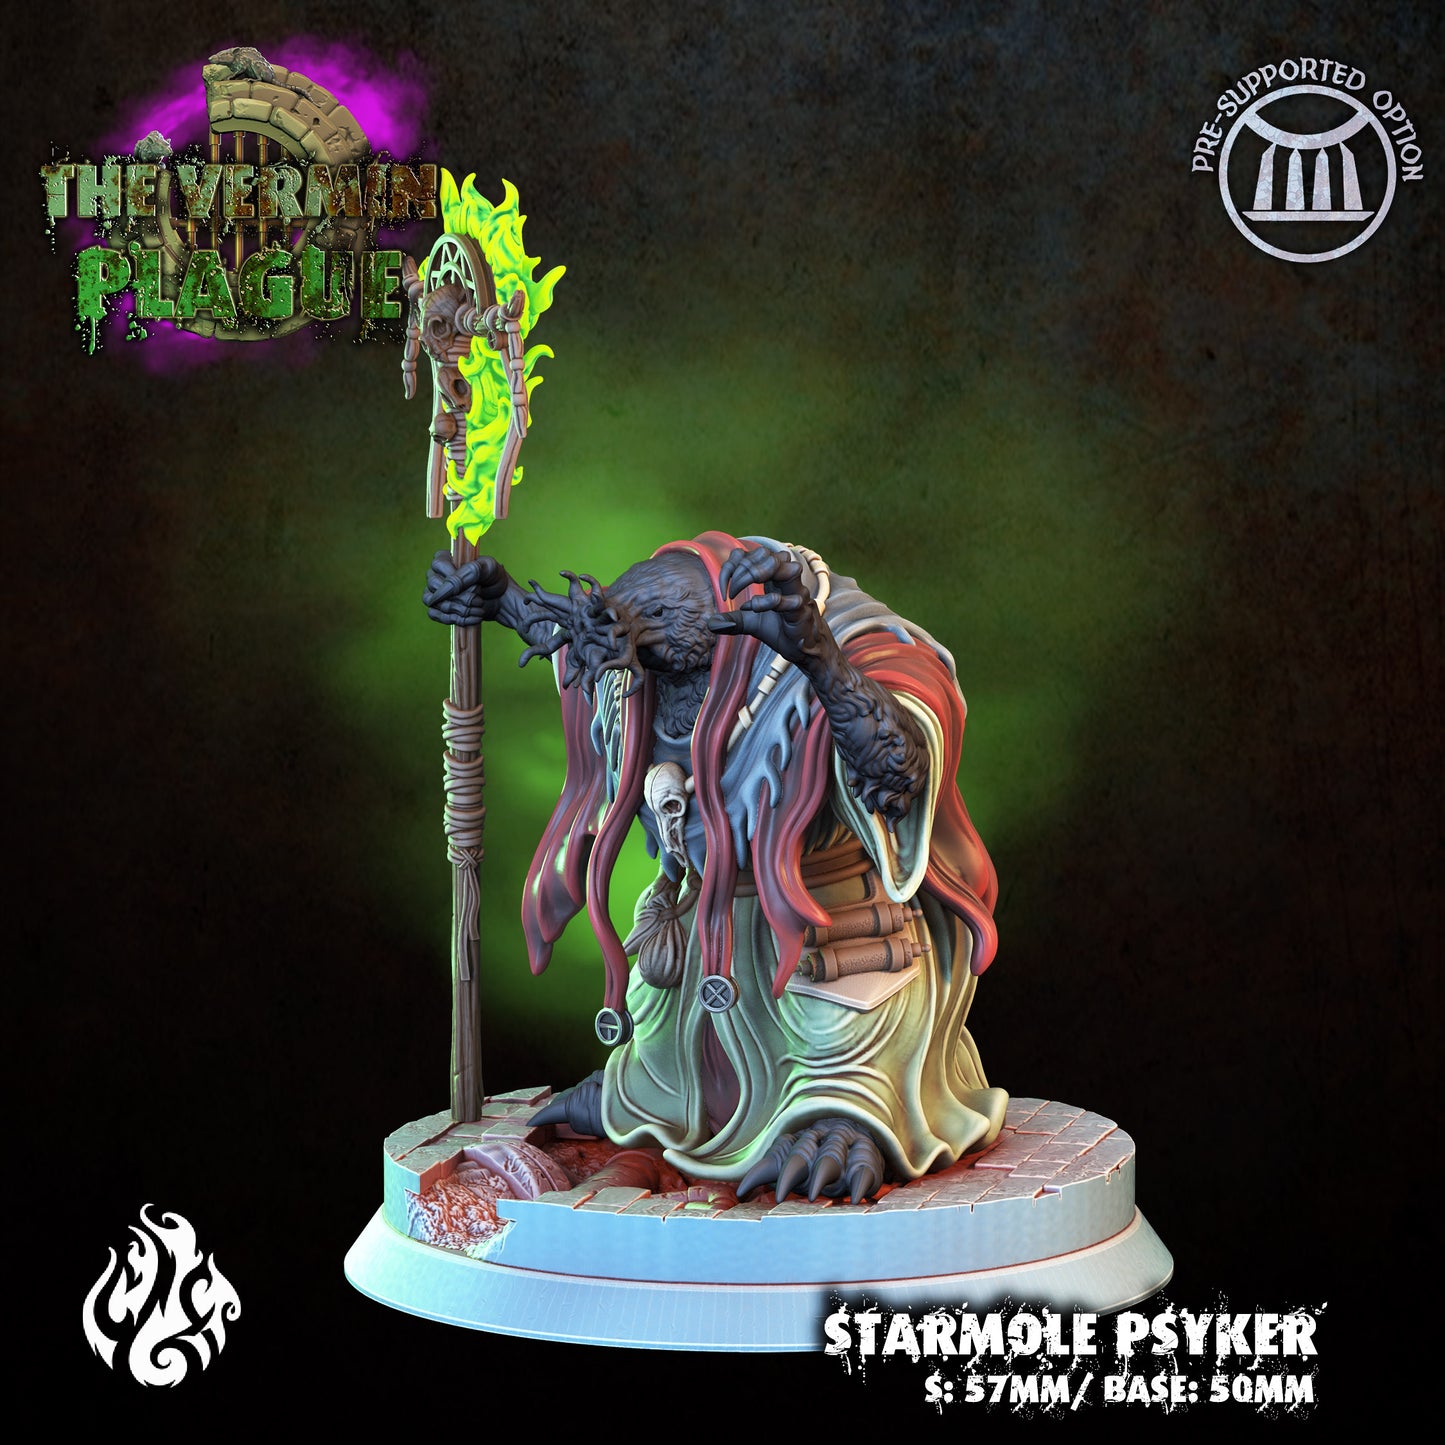 Starmole Psyker The Vermin Plague Series from Crippled God Foundry - Table-top gaming mini and collectable for painting.